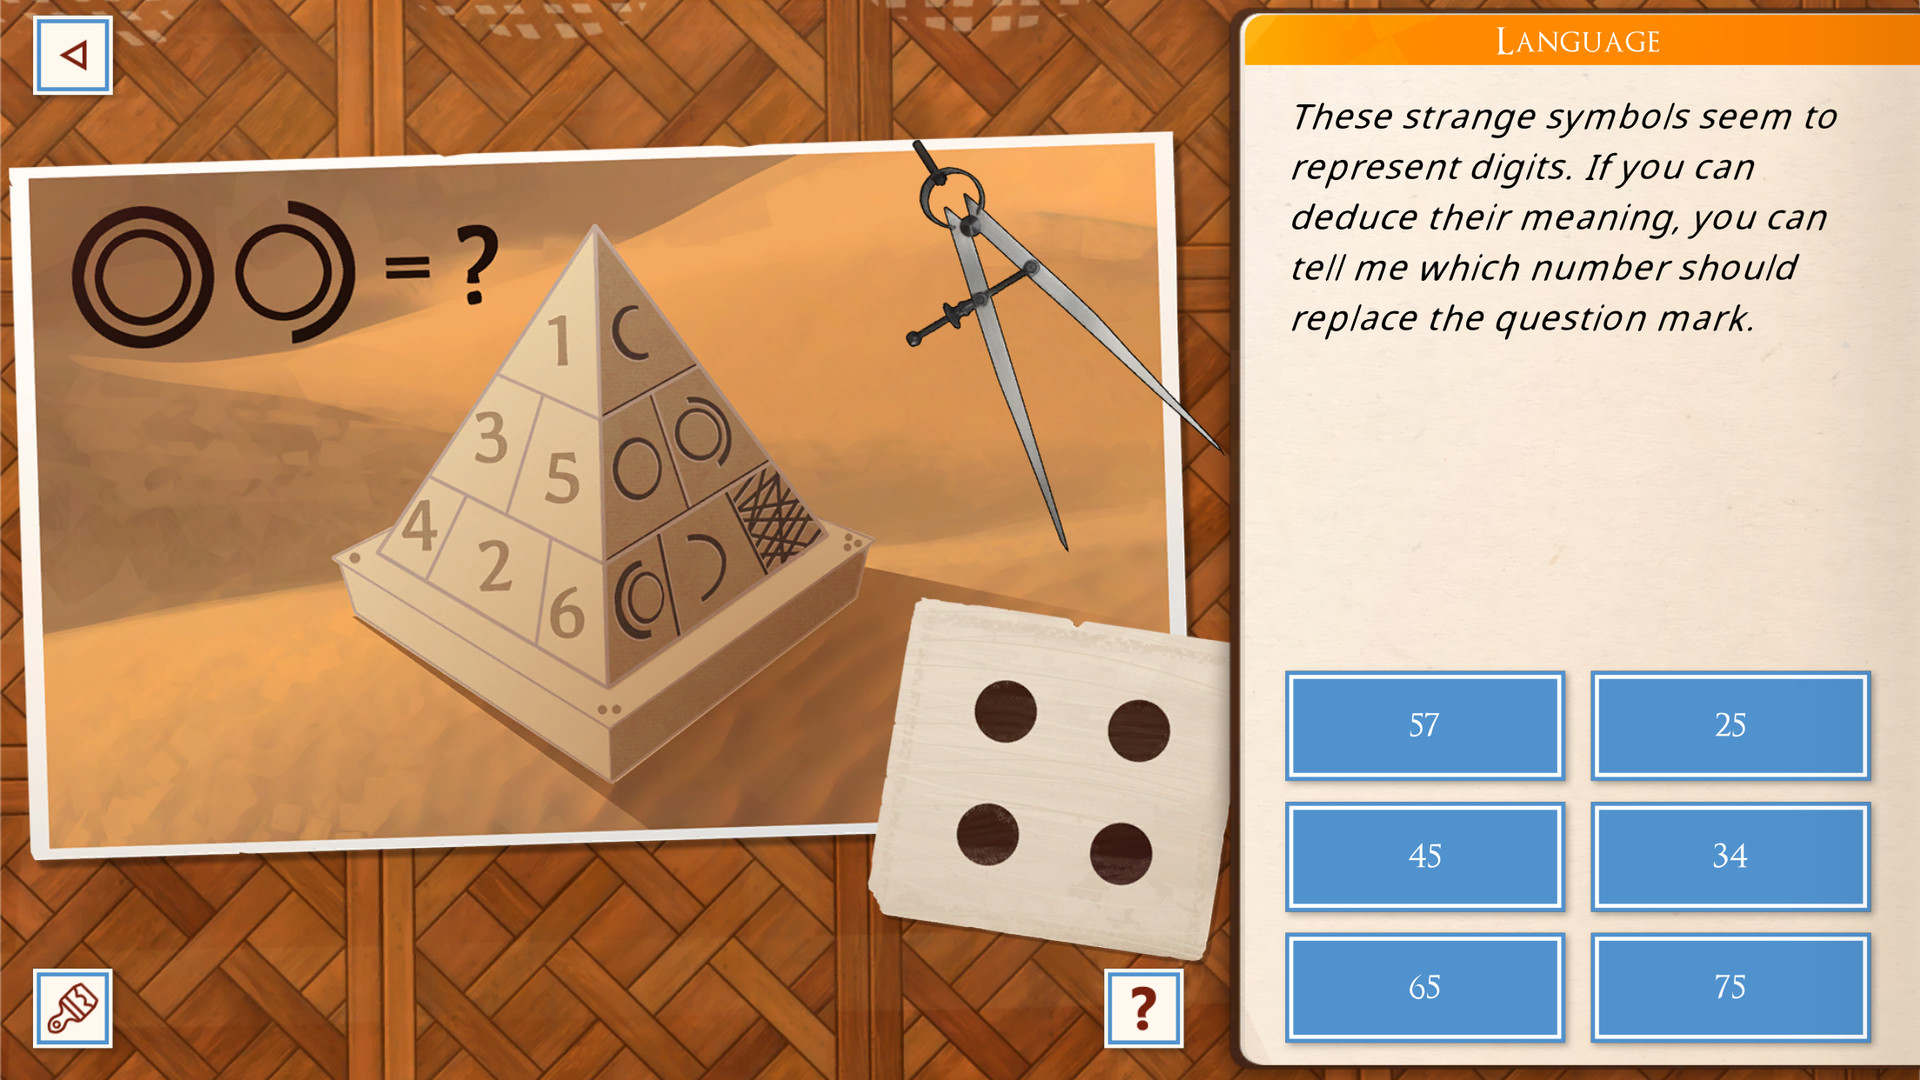 The Academy: The First Riddle Free Download